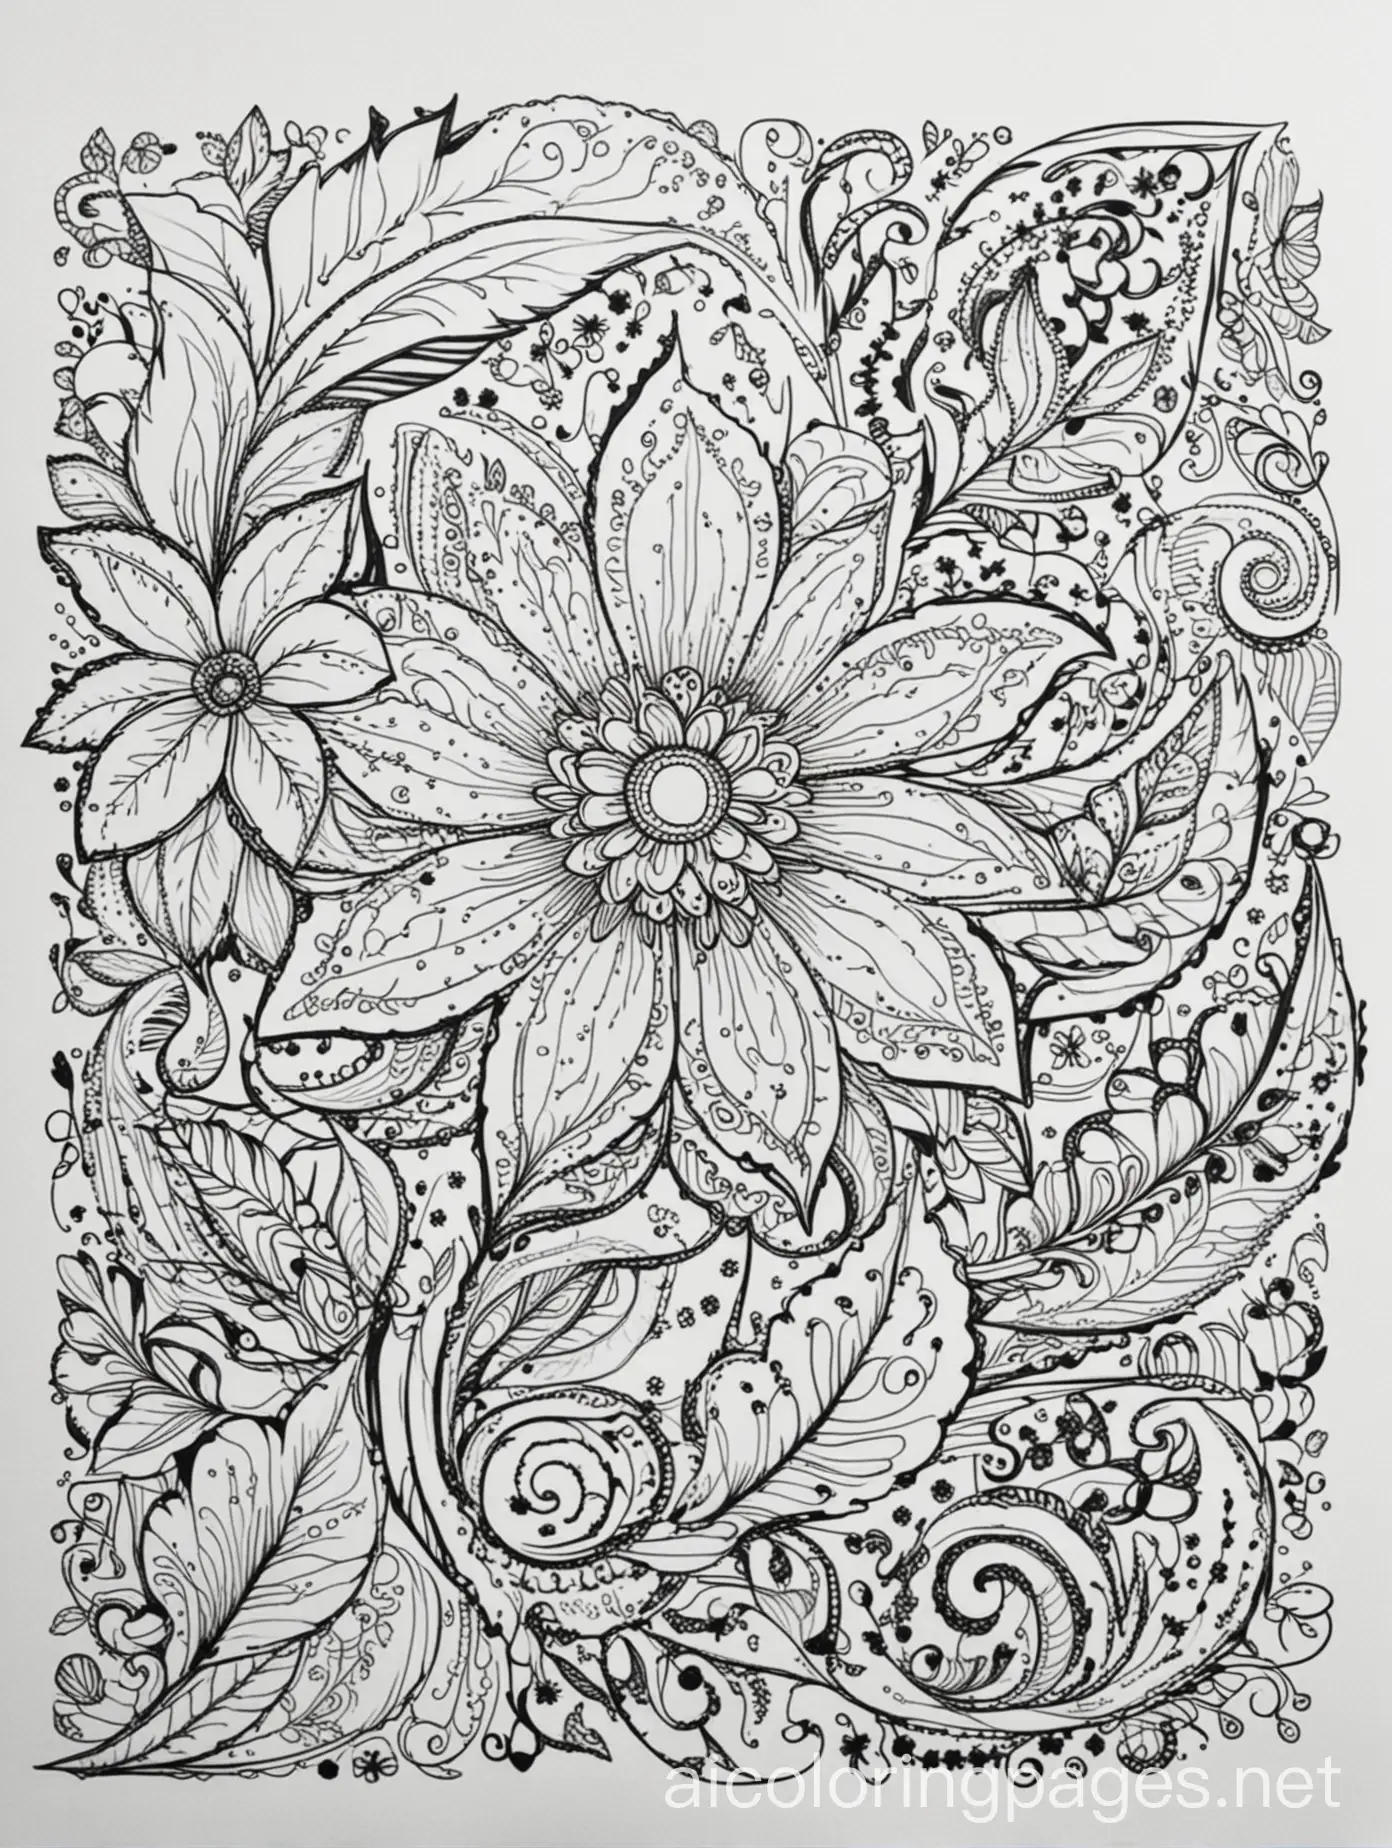 Coloring Page, black and white, line art, white background, Simplicity, Ample White Space. The background of the coloring page is plain white to make it easy for young children to color within the lines. The outlines of the paisley shapes and floral designs are easy to distinguish, making it simple for kids to color without too much difficulty. less detailed just simple flower shapes for a coloring book, Coloring Page, black and white, line art, white background, Simplicity, Ample White Space. The background of the coloring page is plain white to make it easy for young children to color within the lines. The outlines of all the subjects are easy to distinguish, making it simple for kids to color without too much difficulty